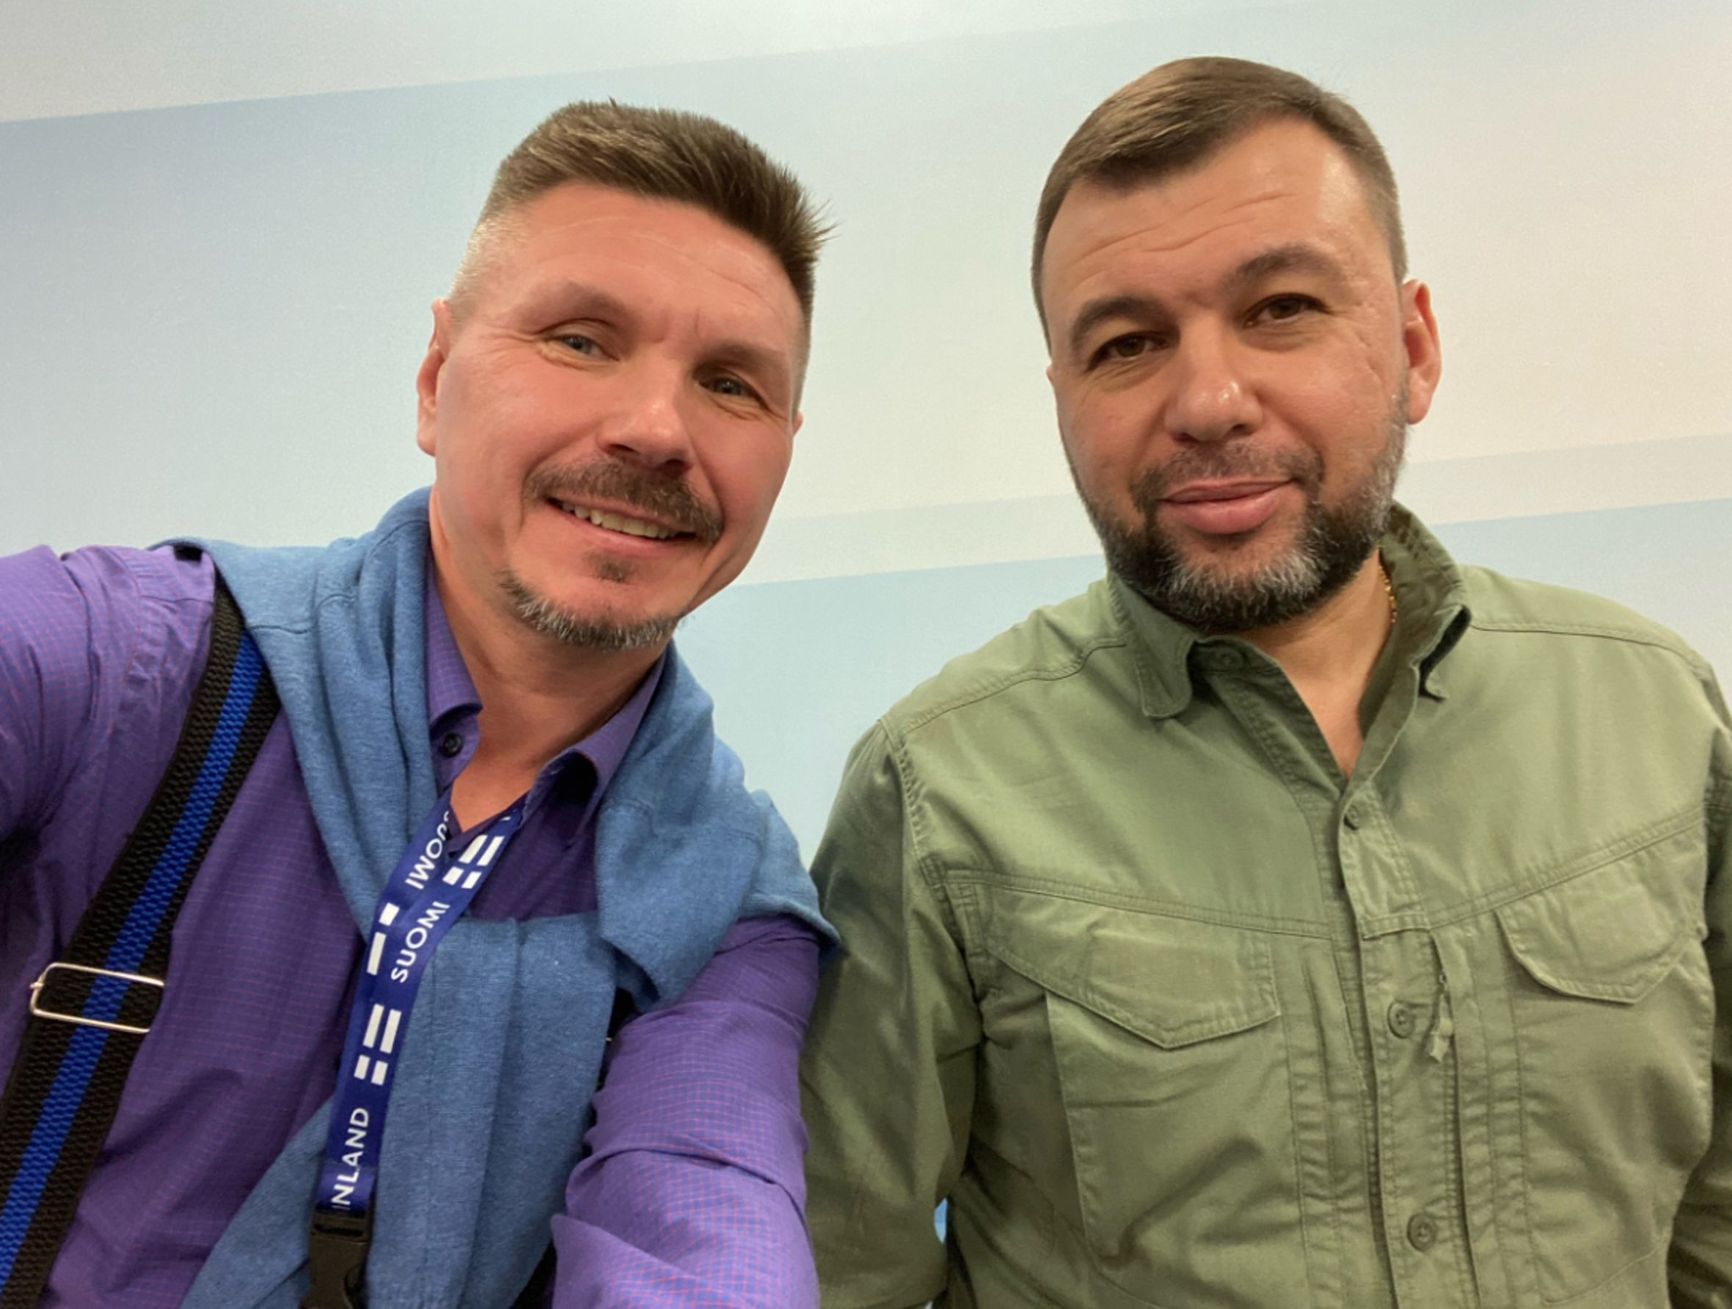 Kosti Heiskanen and Denis Pushilin, the leader of the so-called Donetsk People's Republic